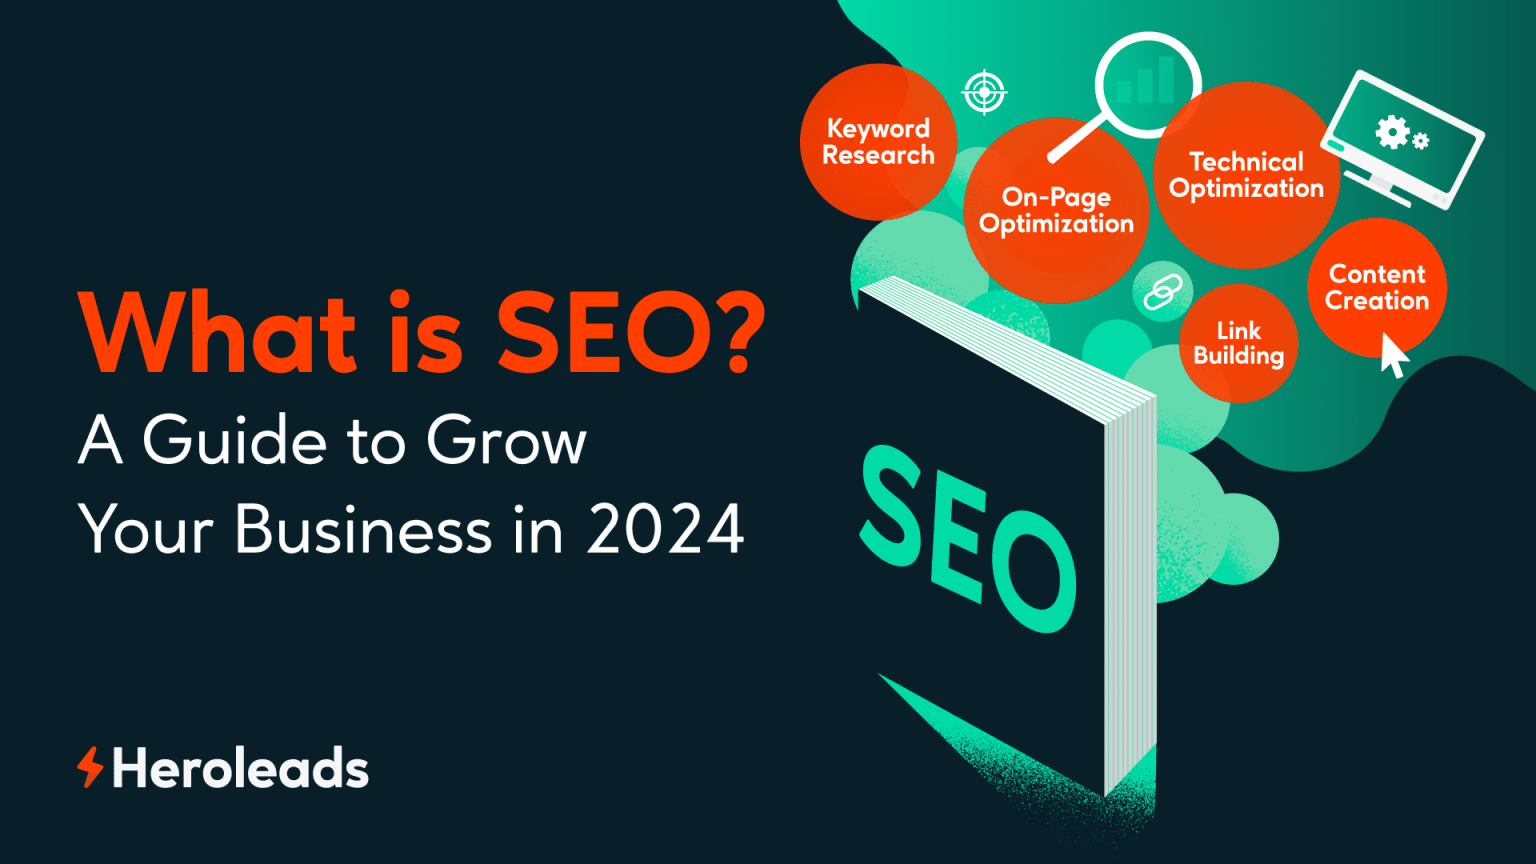 Blog---What-is-SEO--A-Guide-to-Grow-Your-Business-in-2024